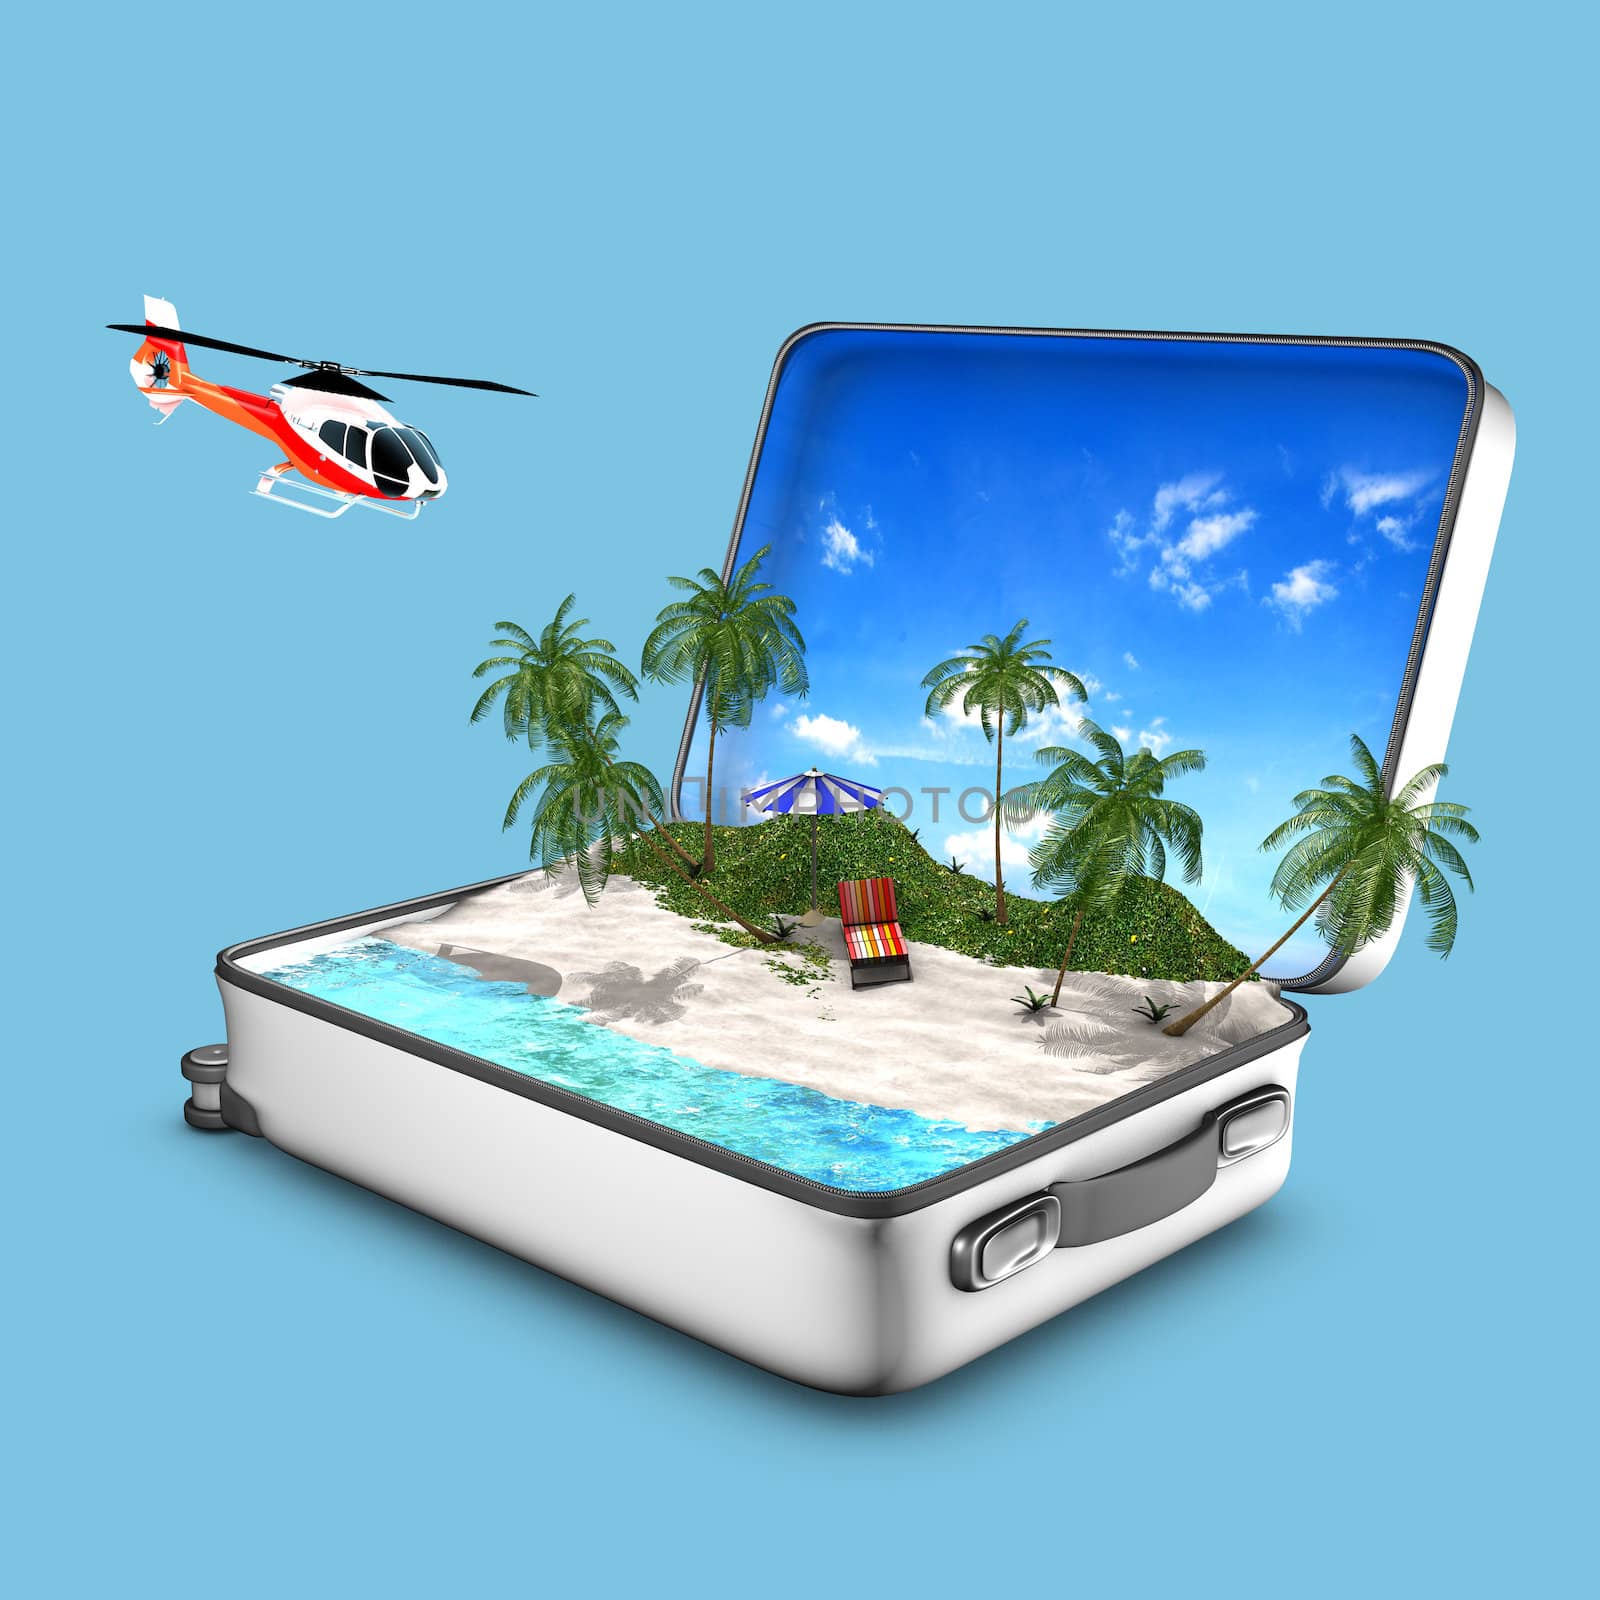 Concept of opened suitcase that contains a paradise beach with sea, sand, grass, lounger, helicopter